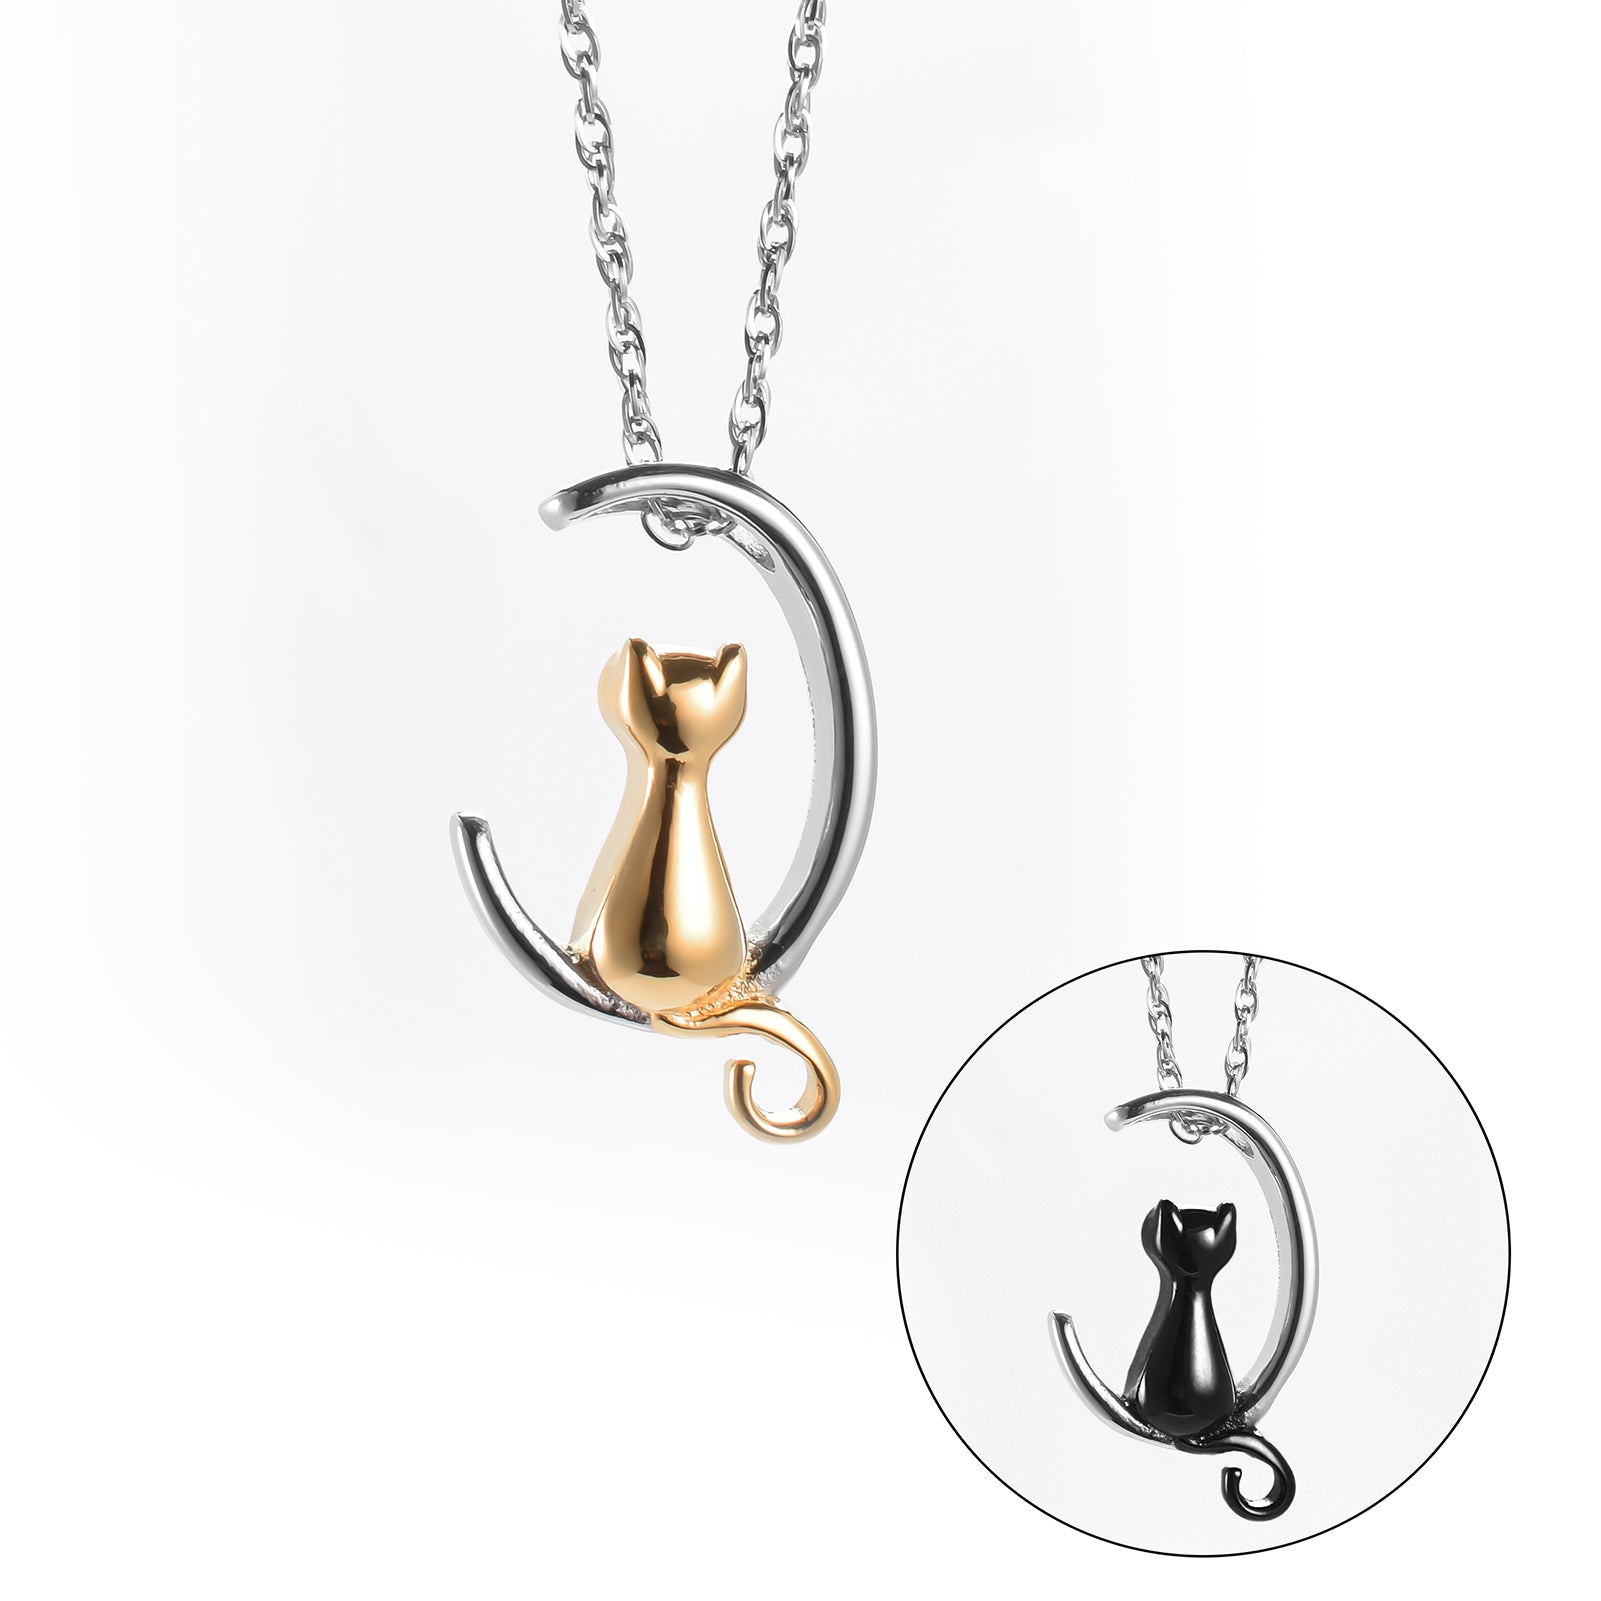 Cat Cremation Jewelry for Pets